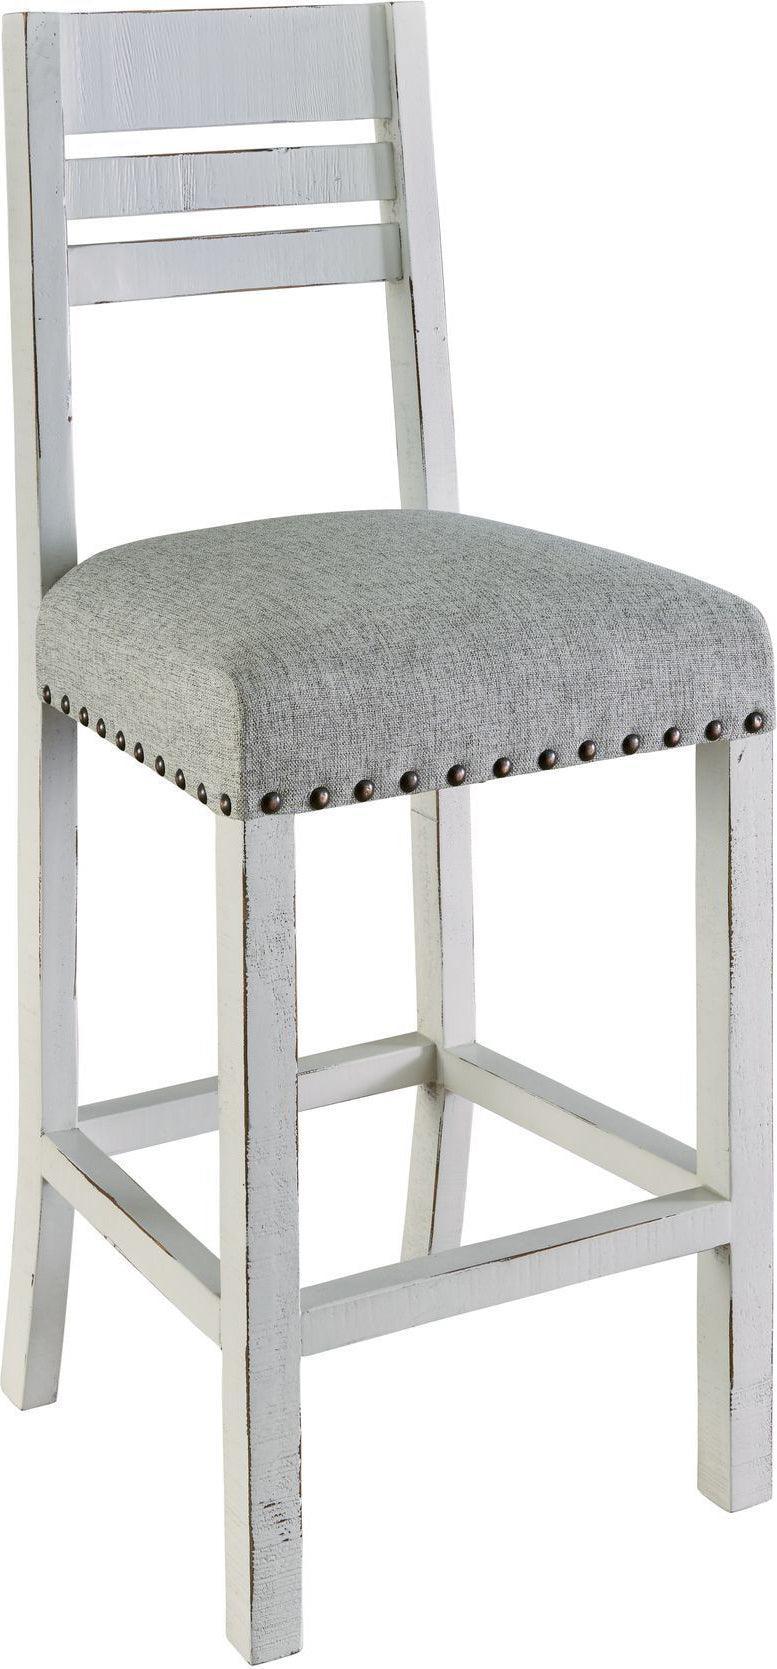 Elements Barstools - Robertson Bar Stool in White